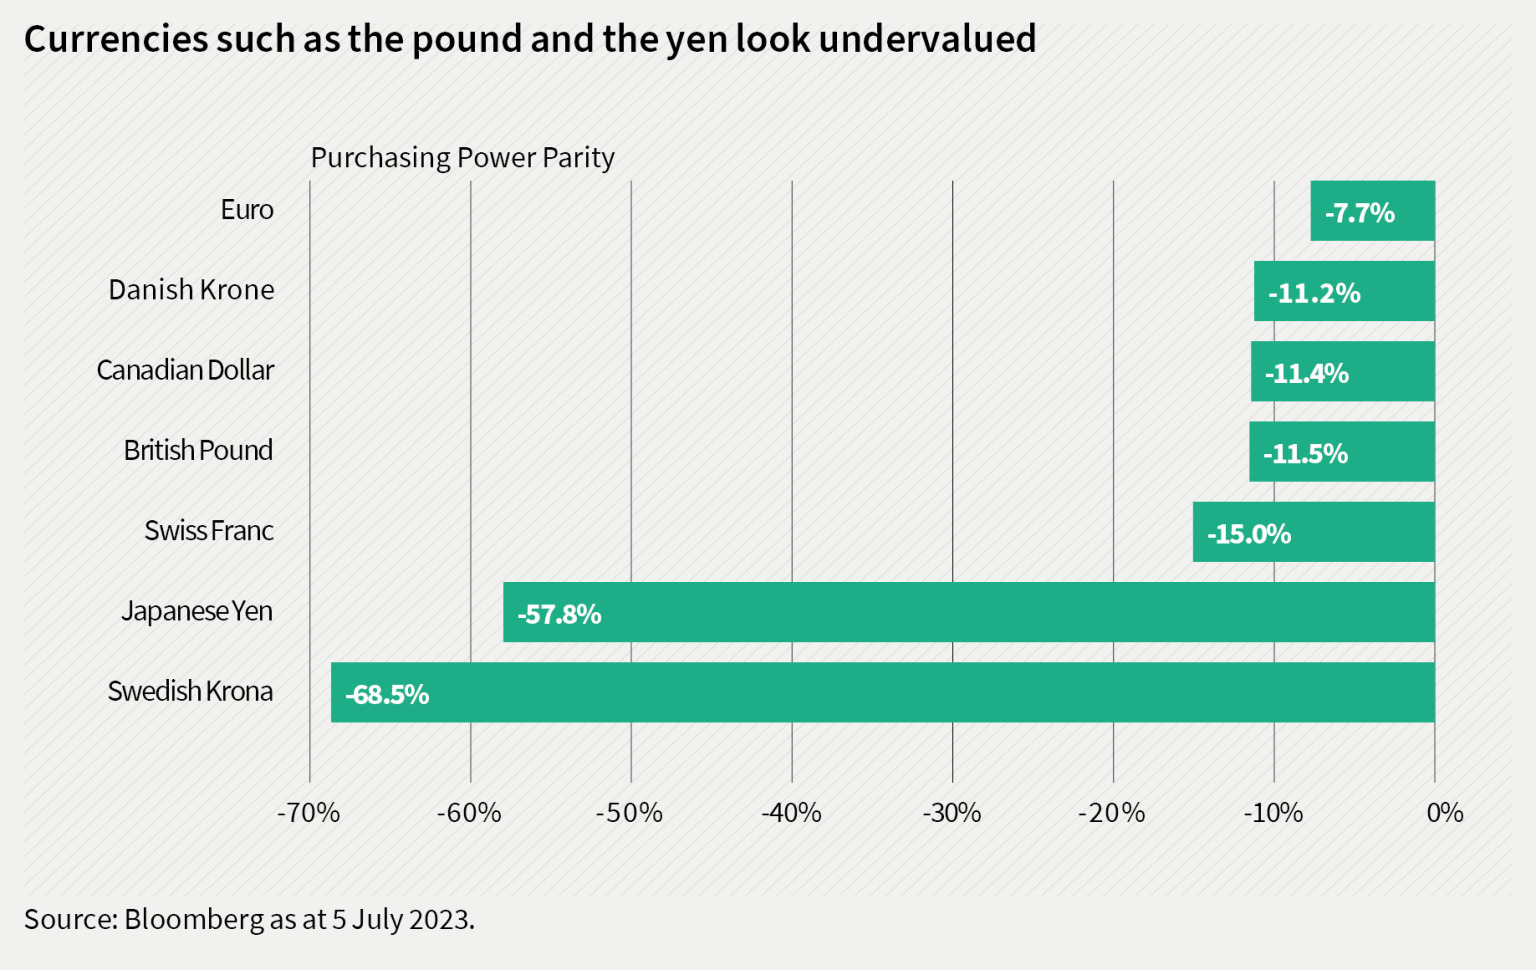 Currencies such as the pound and the yen look undervalued